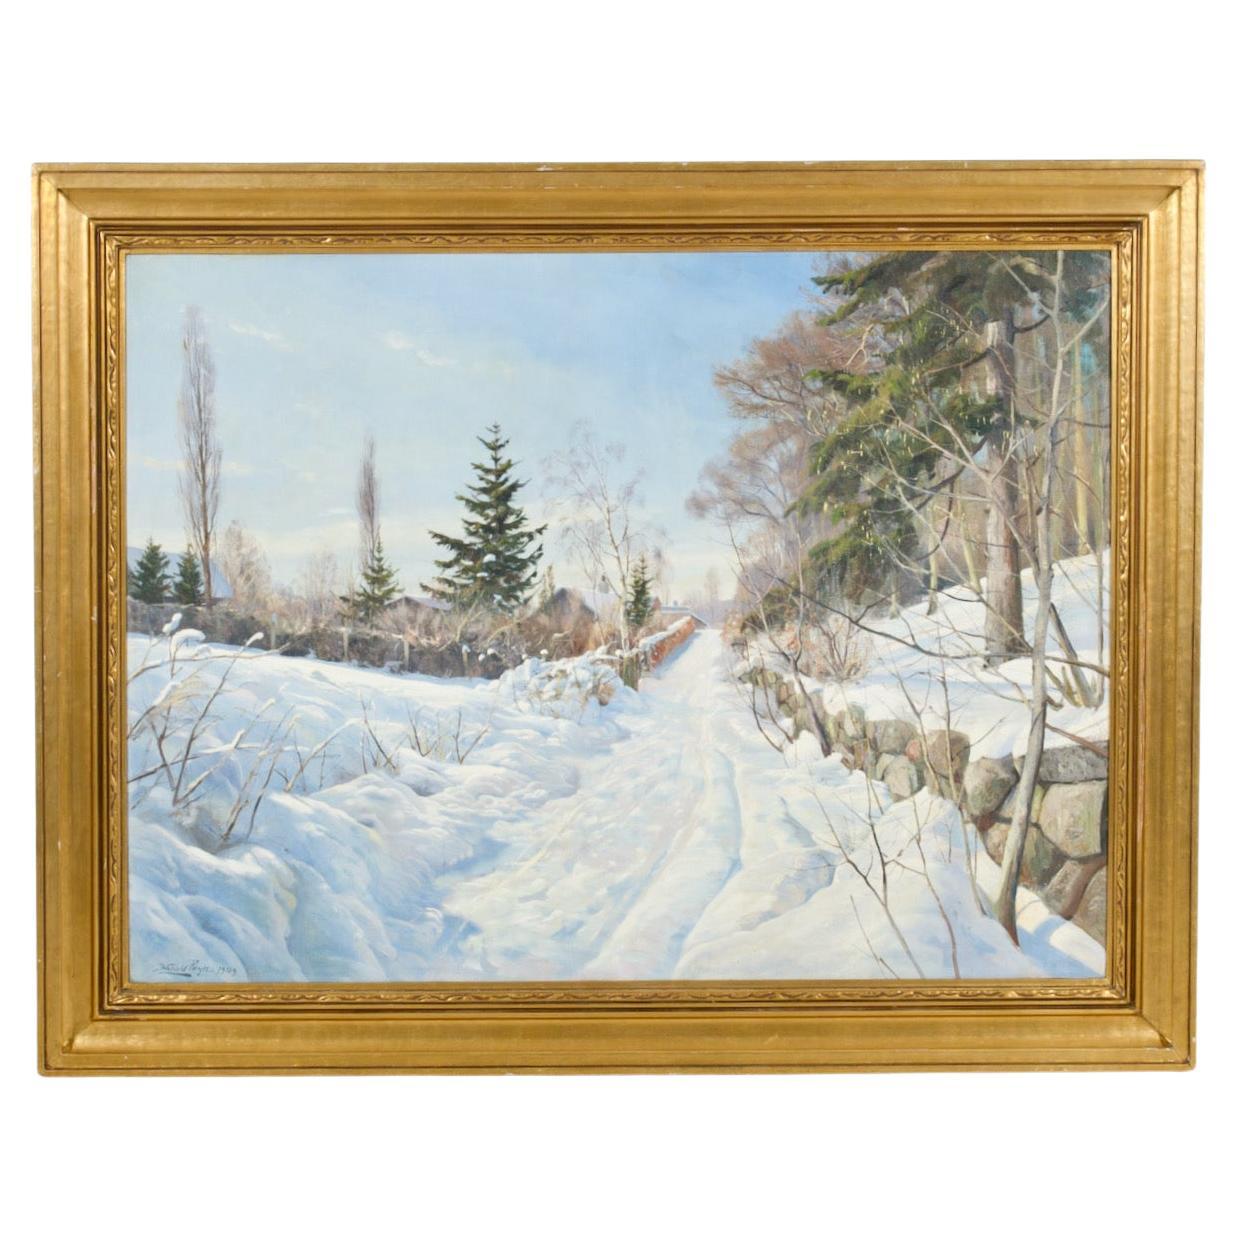 Winter-Landscape by Harald Pryn '1891 - 1968', Signed and Dated 1949 For Sale